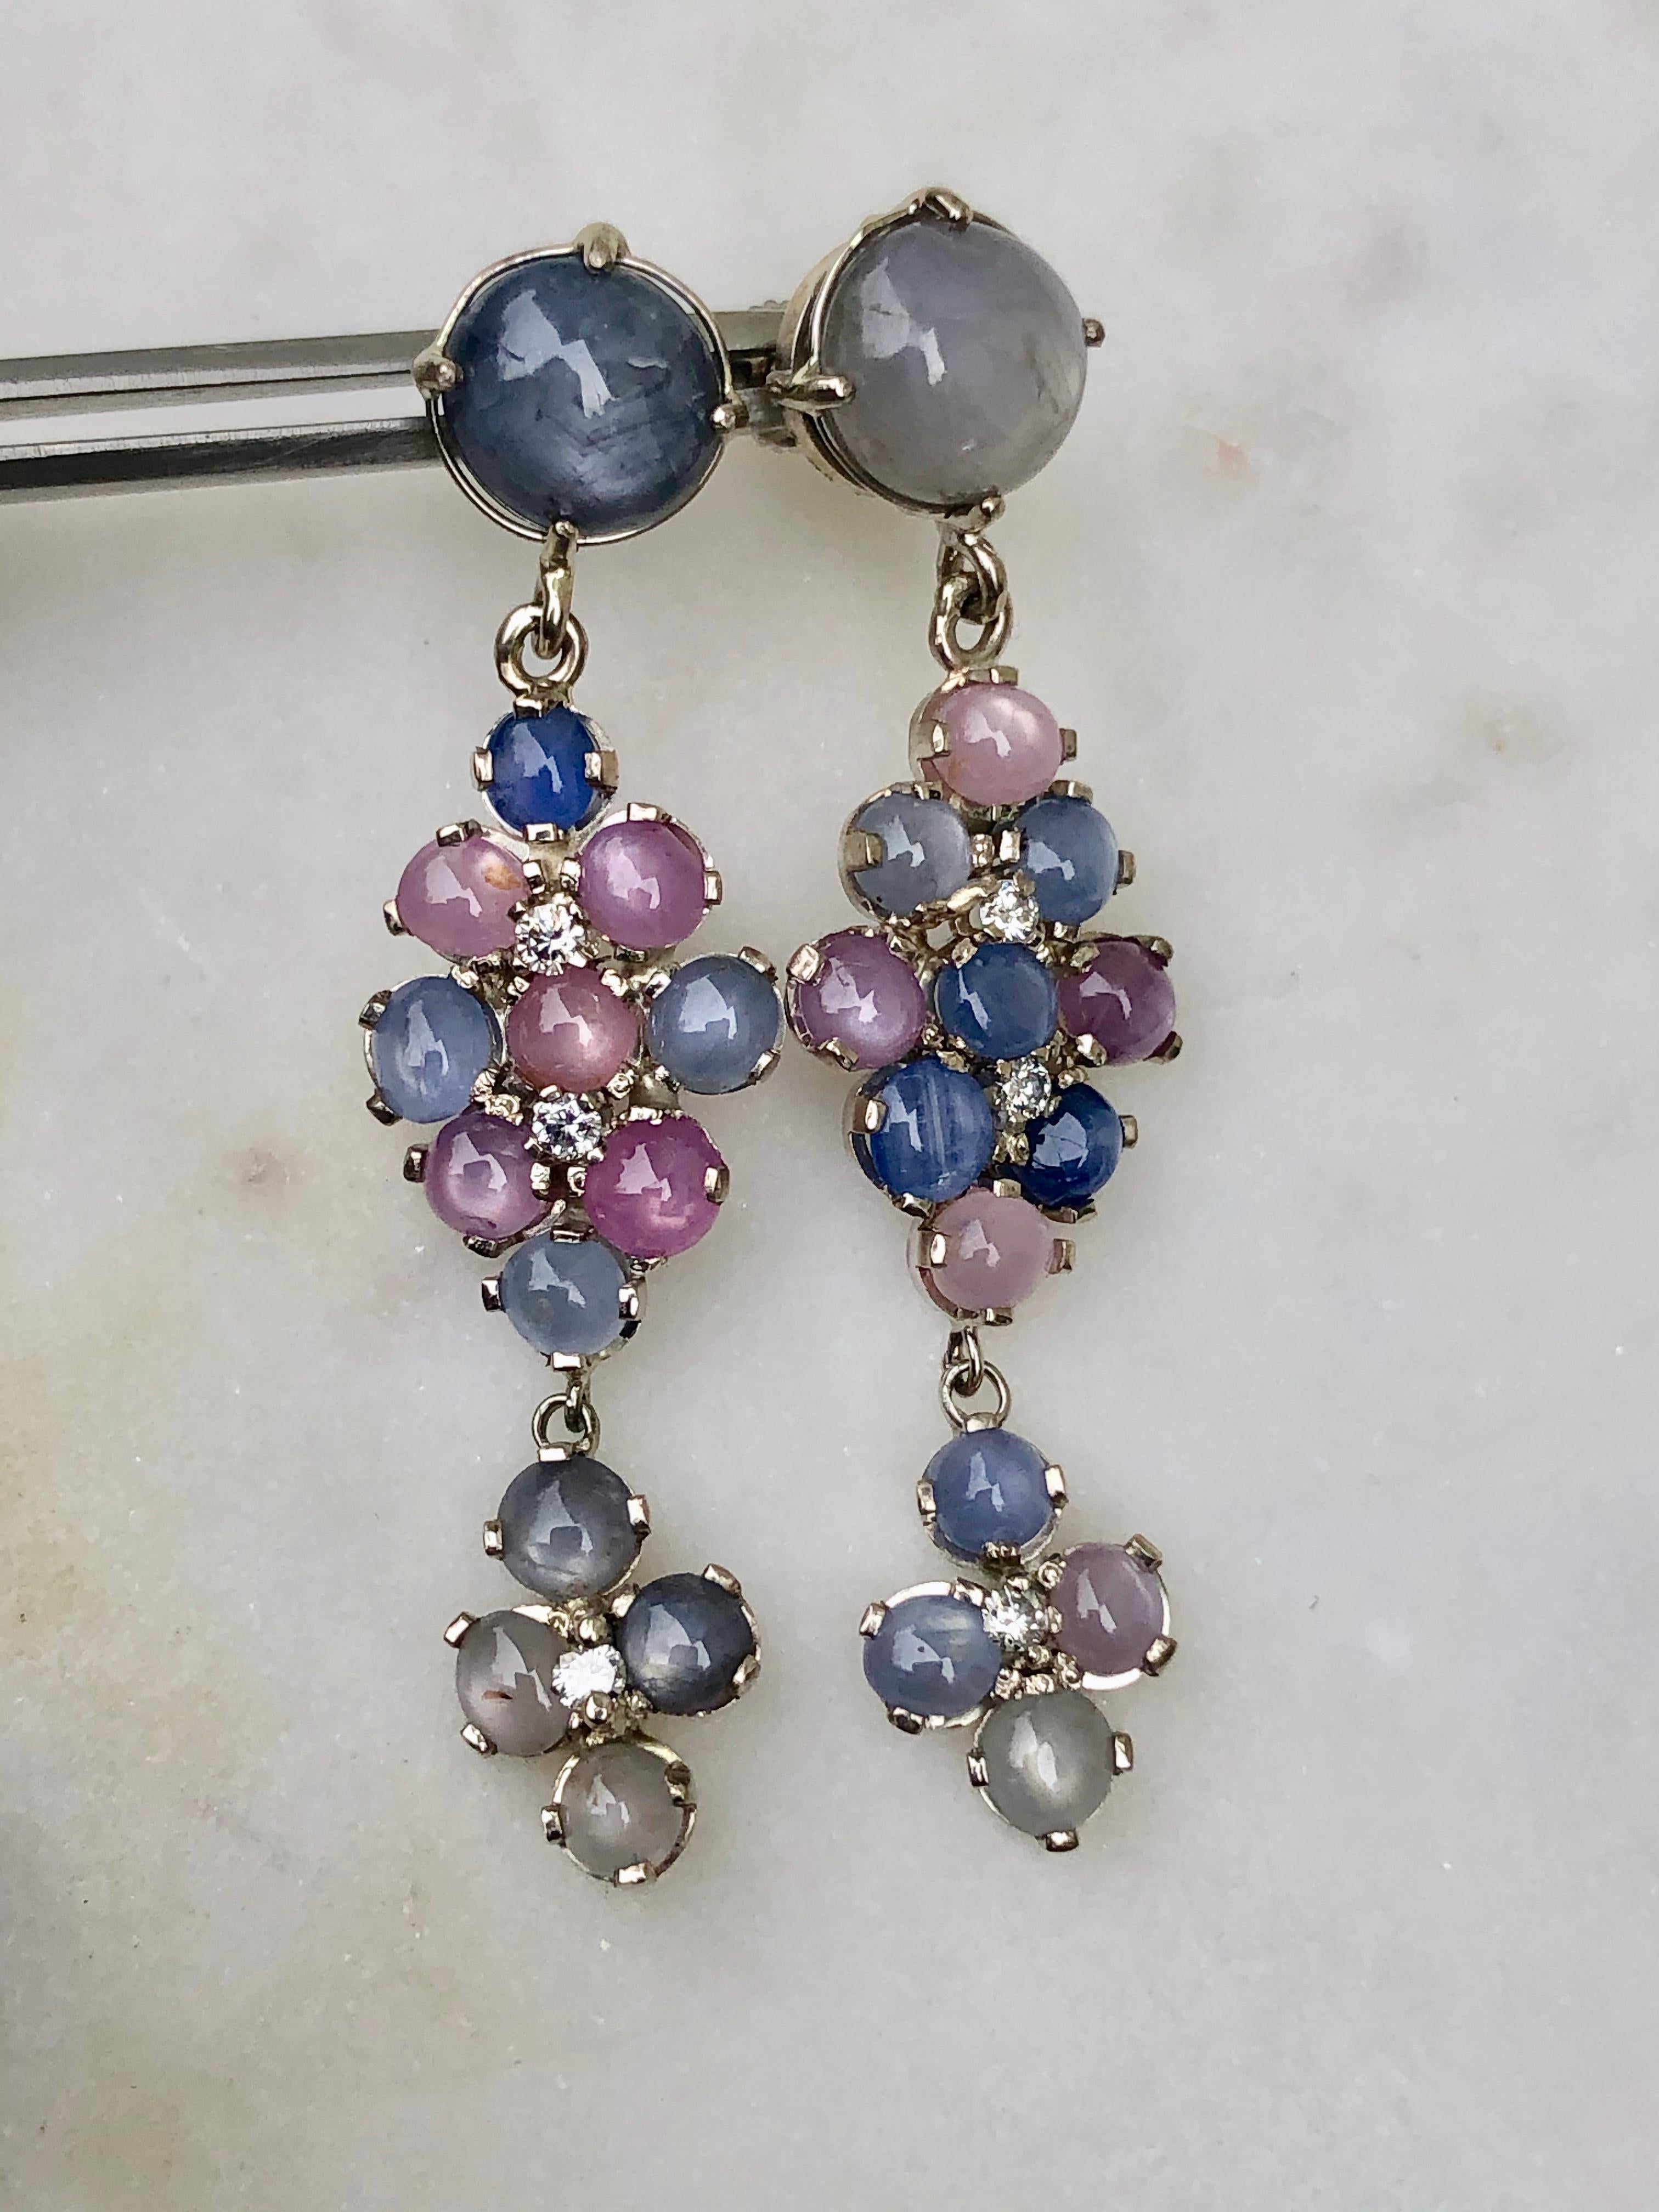 Art Deco Style Chandeliers No Heat Burma Star Sapphire Earrings White Gold/ One of a Kind Burmese Star Sapphire Diamond Earrings - Exclusive
Classy and timeless cocktail dangle earrings. Elegant and wearable, the earrings are a great addition to